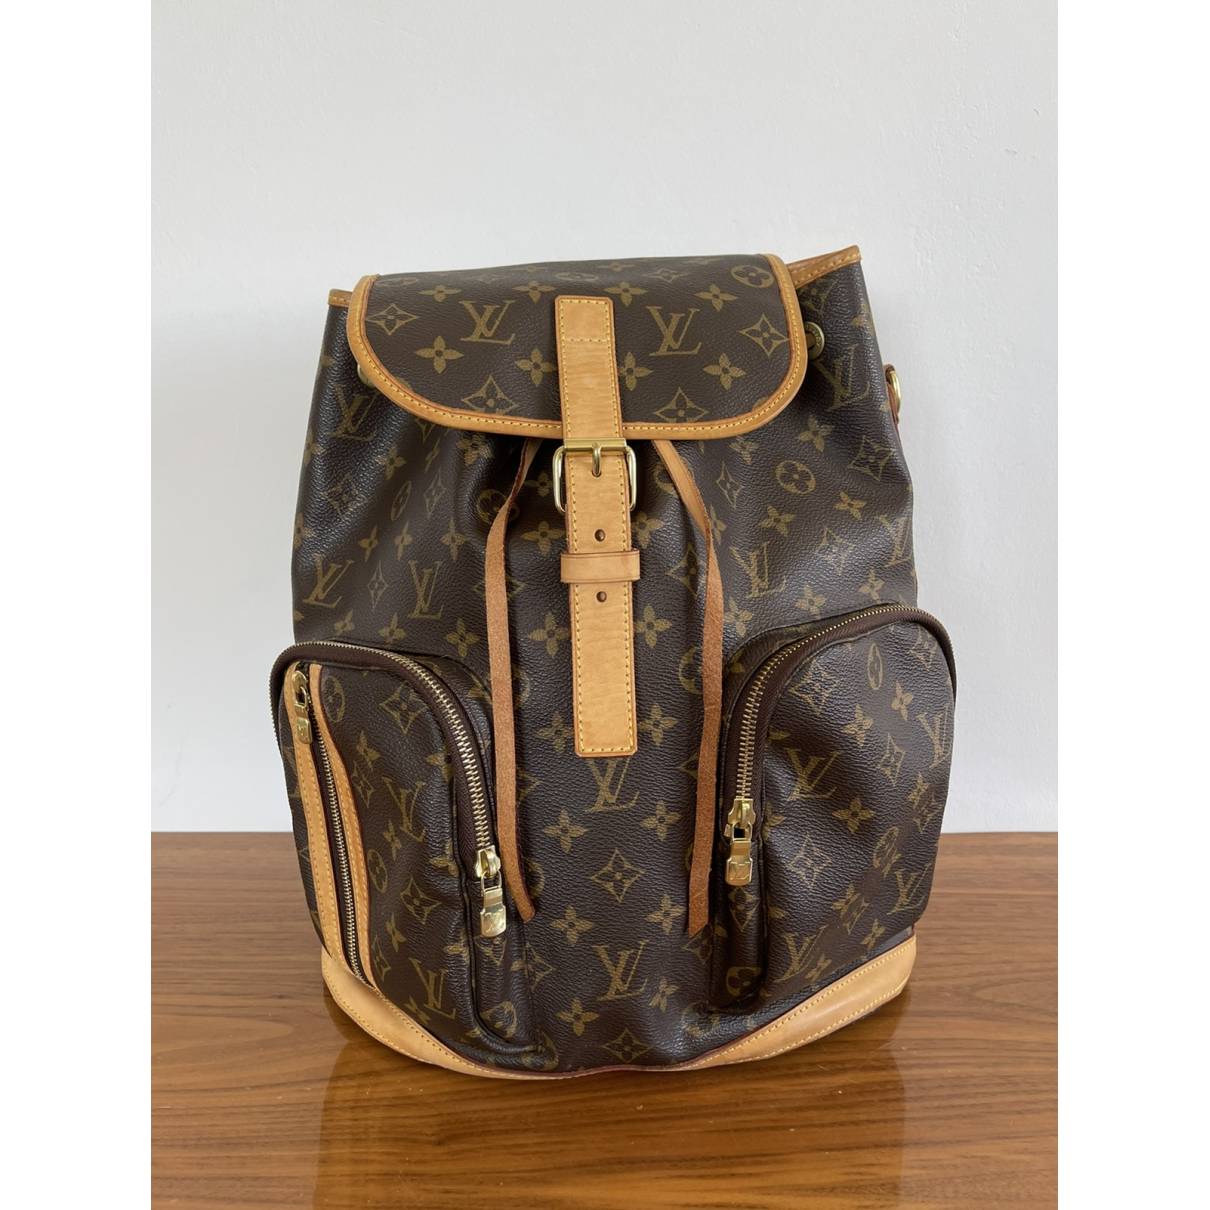 louis vuitton bosphore backpack - Google Search